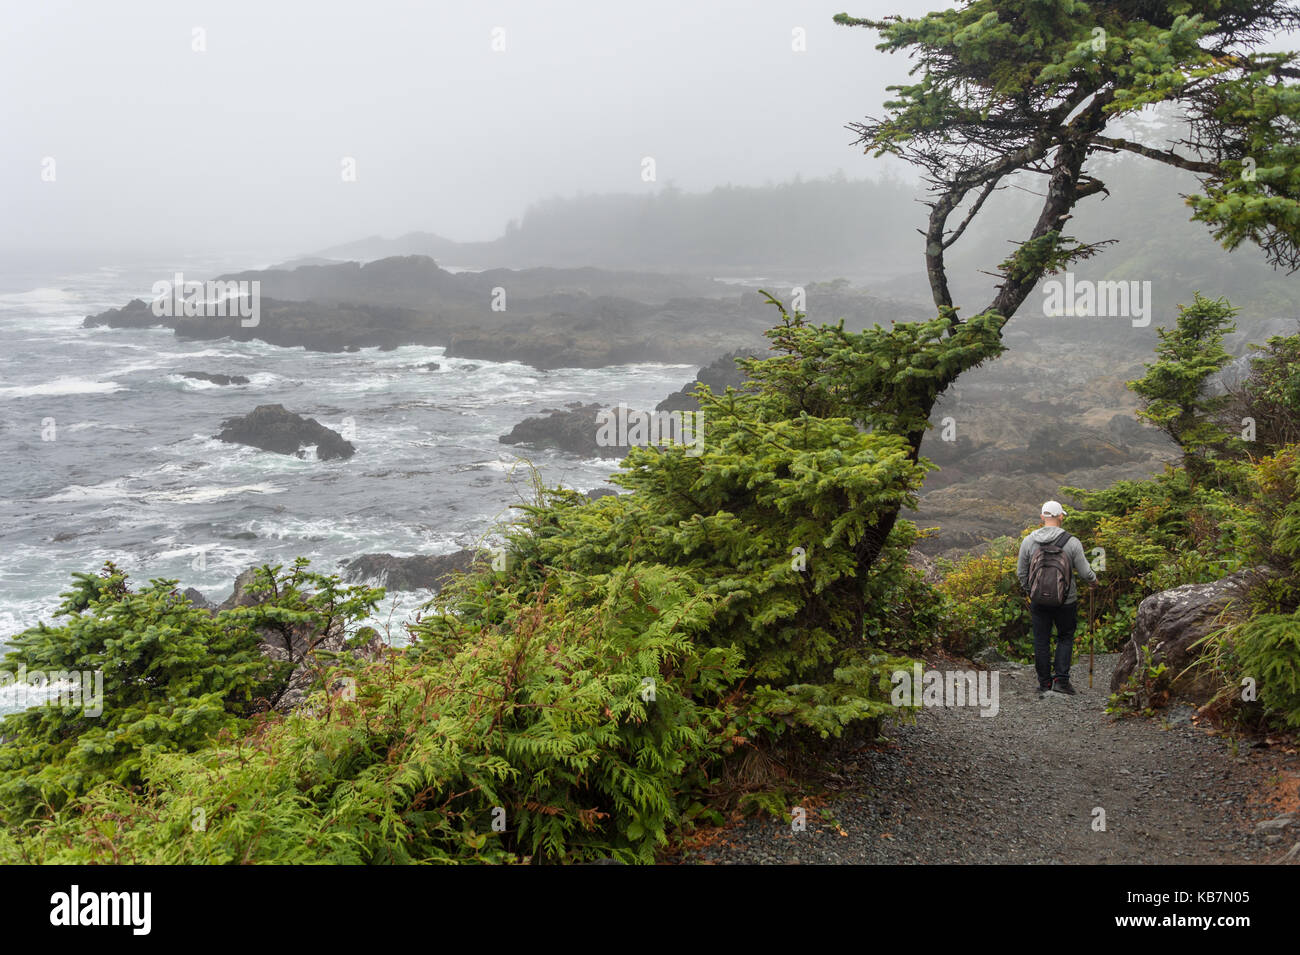 Ucluelet, British Columbia, Canada - 8 September 2017: West Pacific Trail near Ucluelet on a rainy day Stock Photo